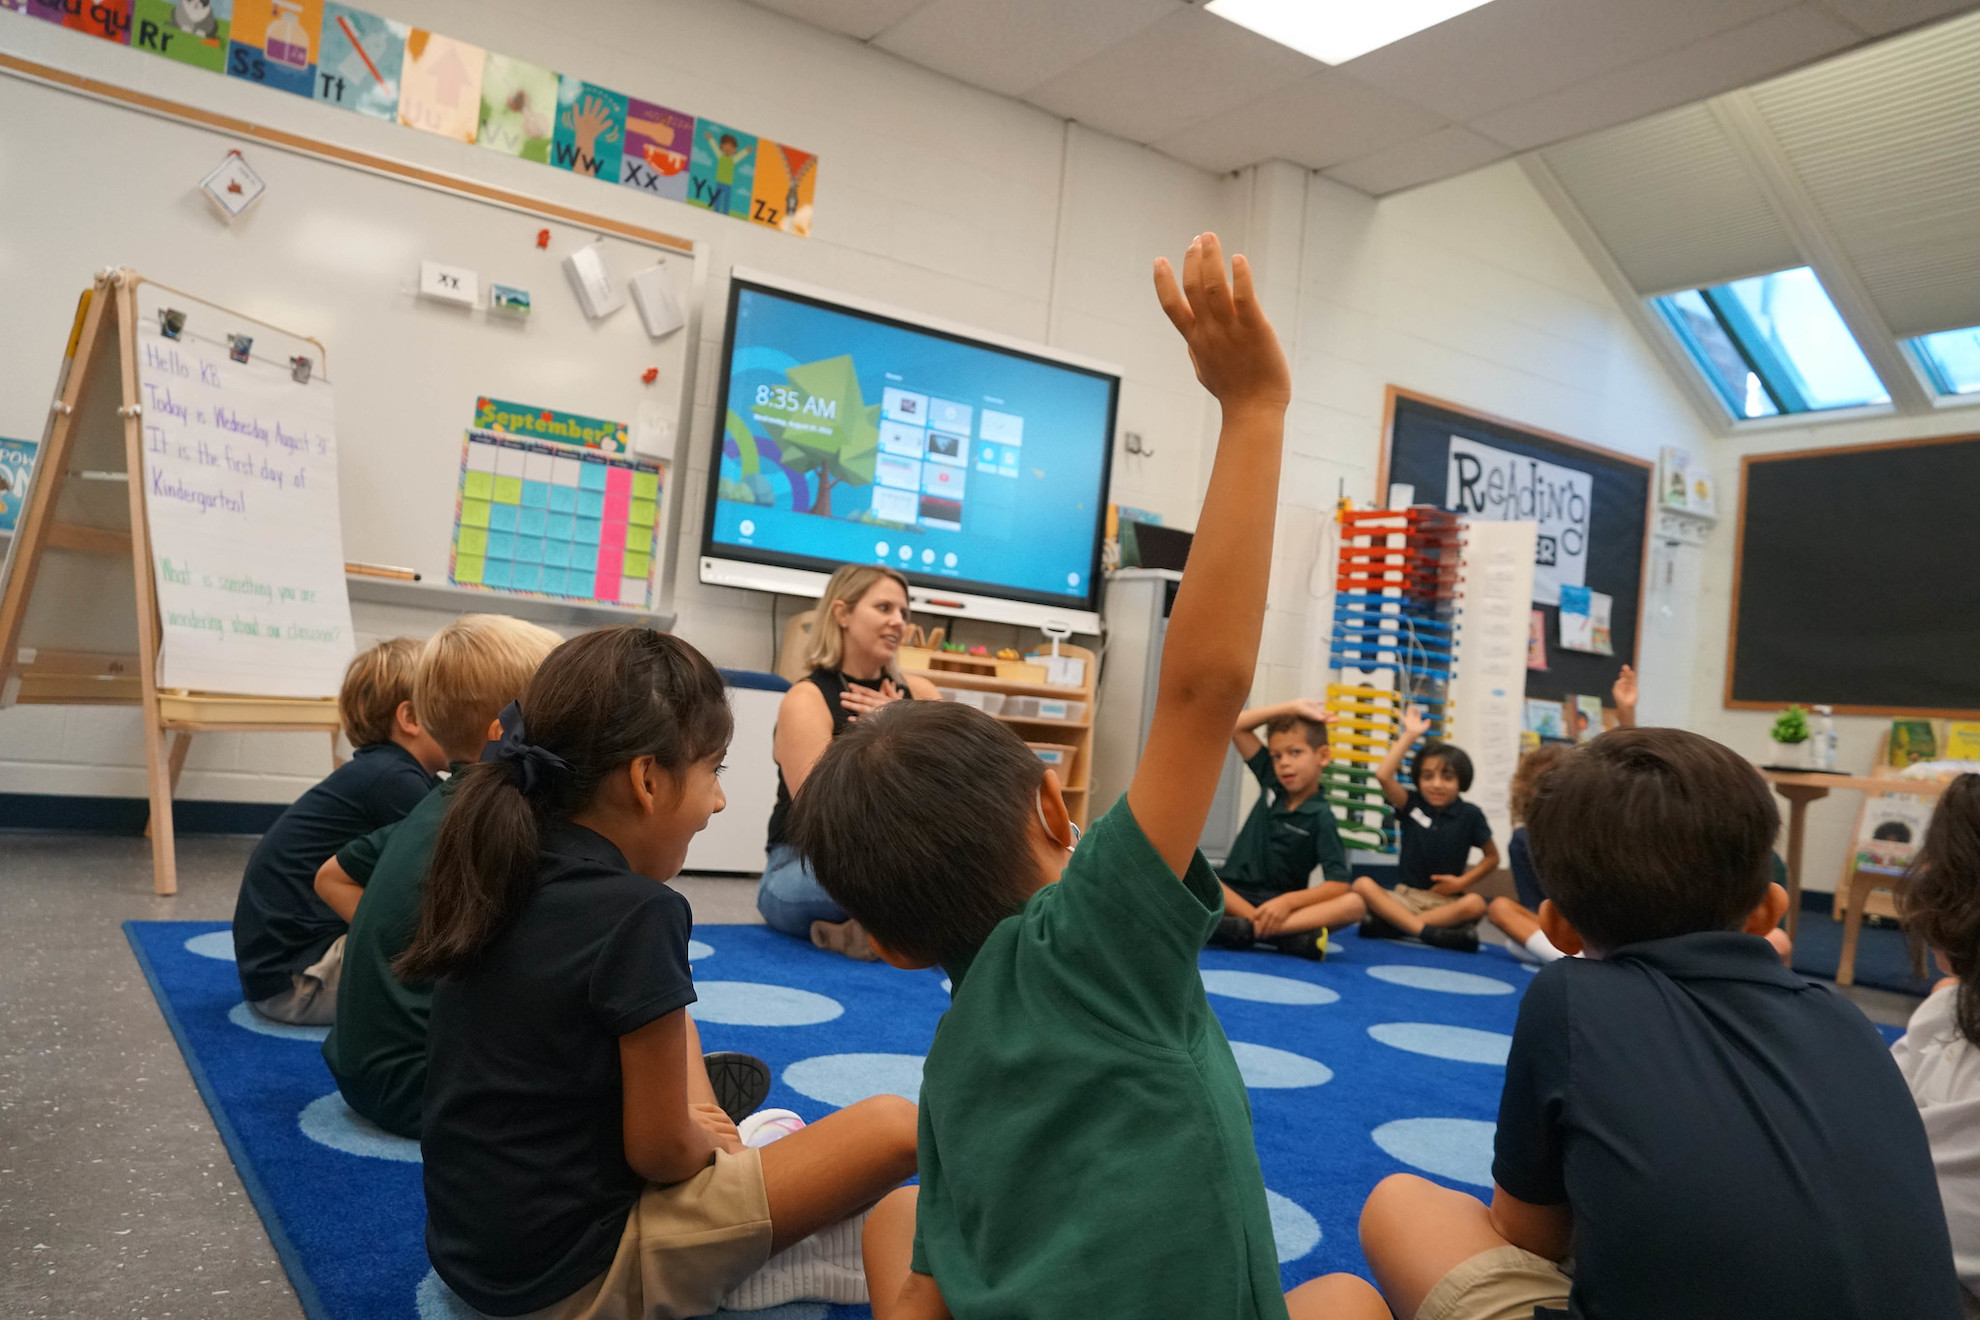 Morning Meeting is a special time every day for kindergarten students and a key component of Responsive Classroom. Teachers reinforce concepts students have learned in previous lessons and focus on building community. The children are given the time and space to ask questions and be curious. 